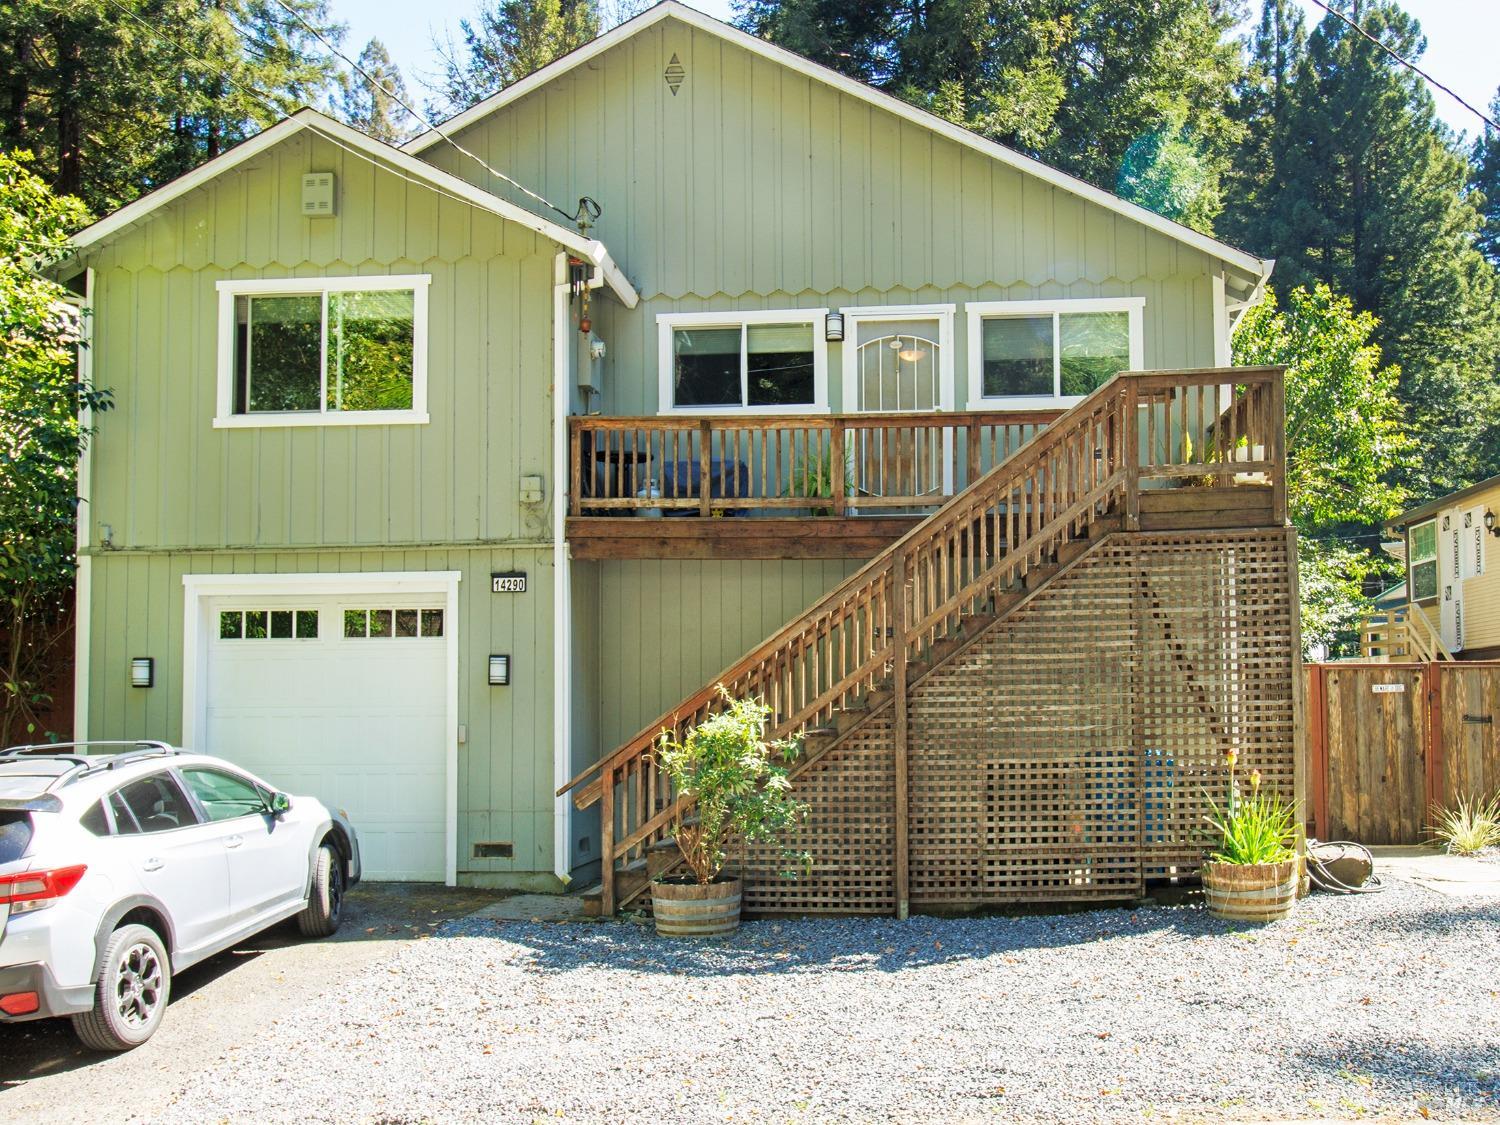 Photo of 14290 Old Cazadero Rd in Guerneville, CA